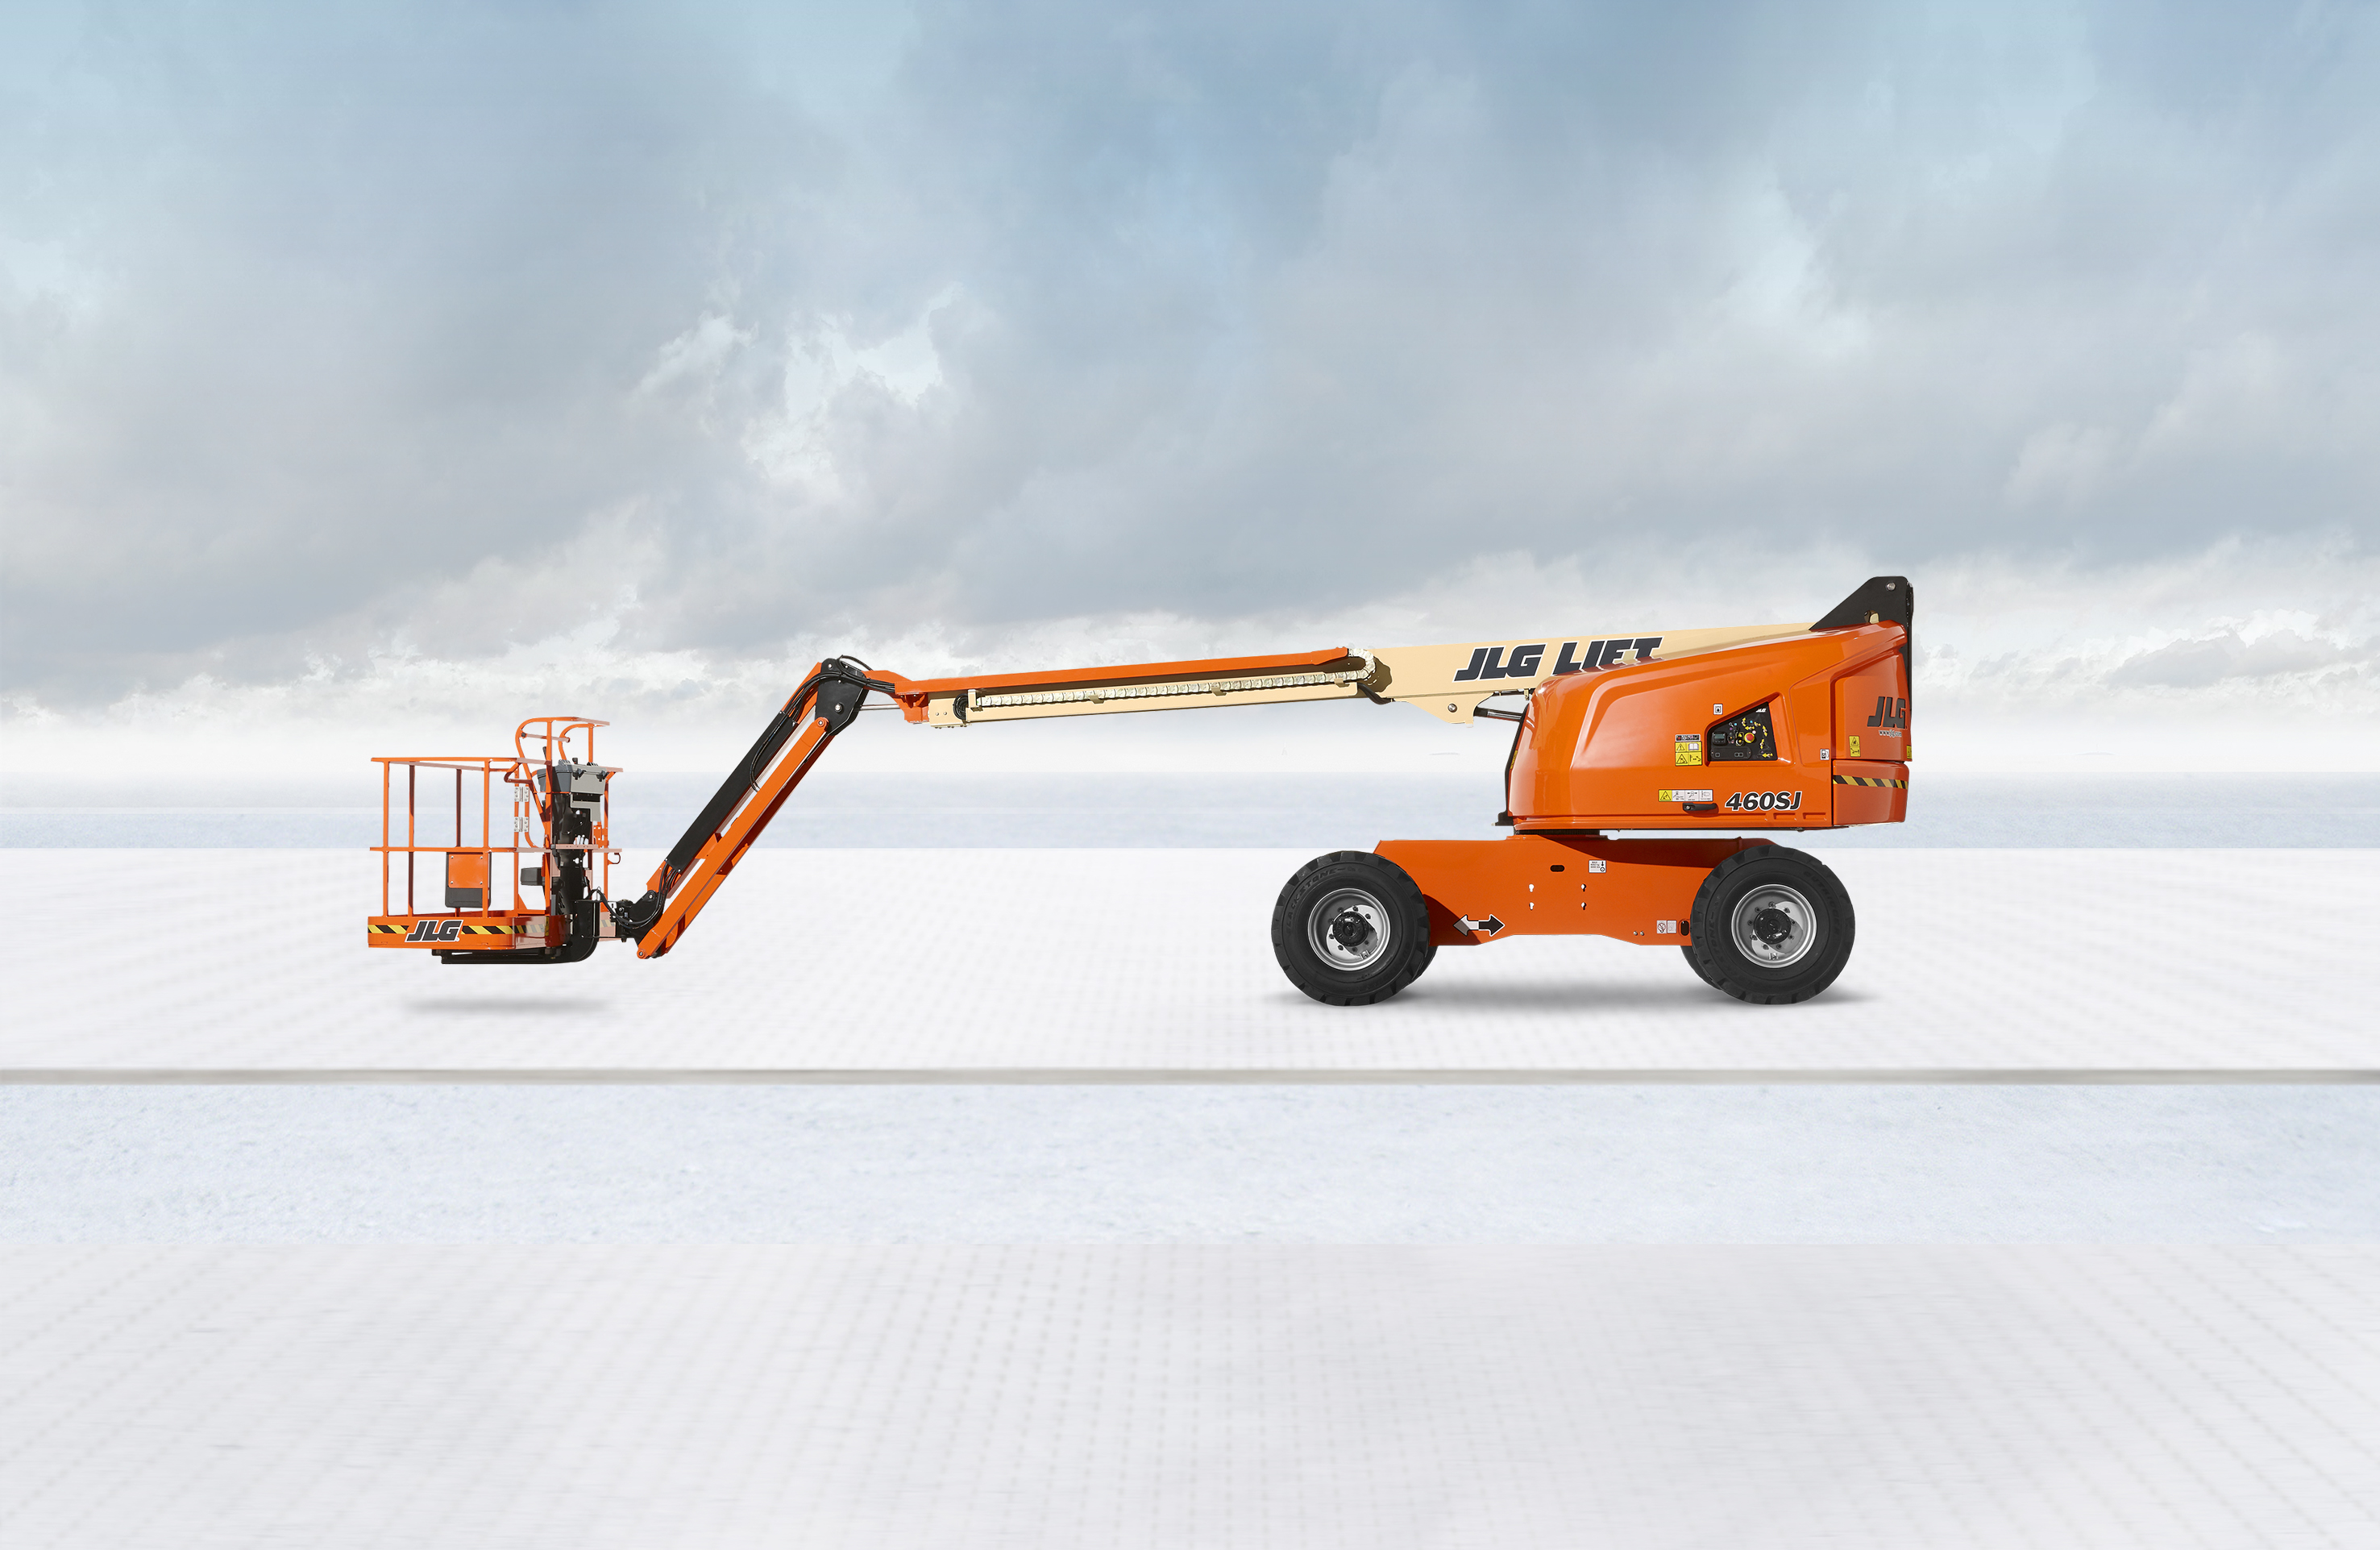 Telescopic boom lifts with tires